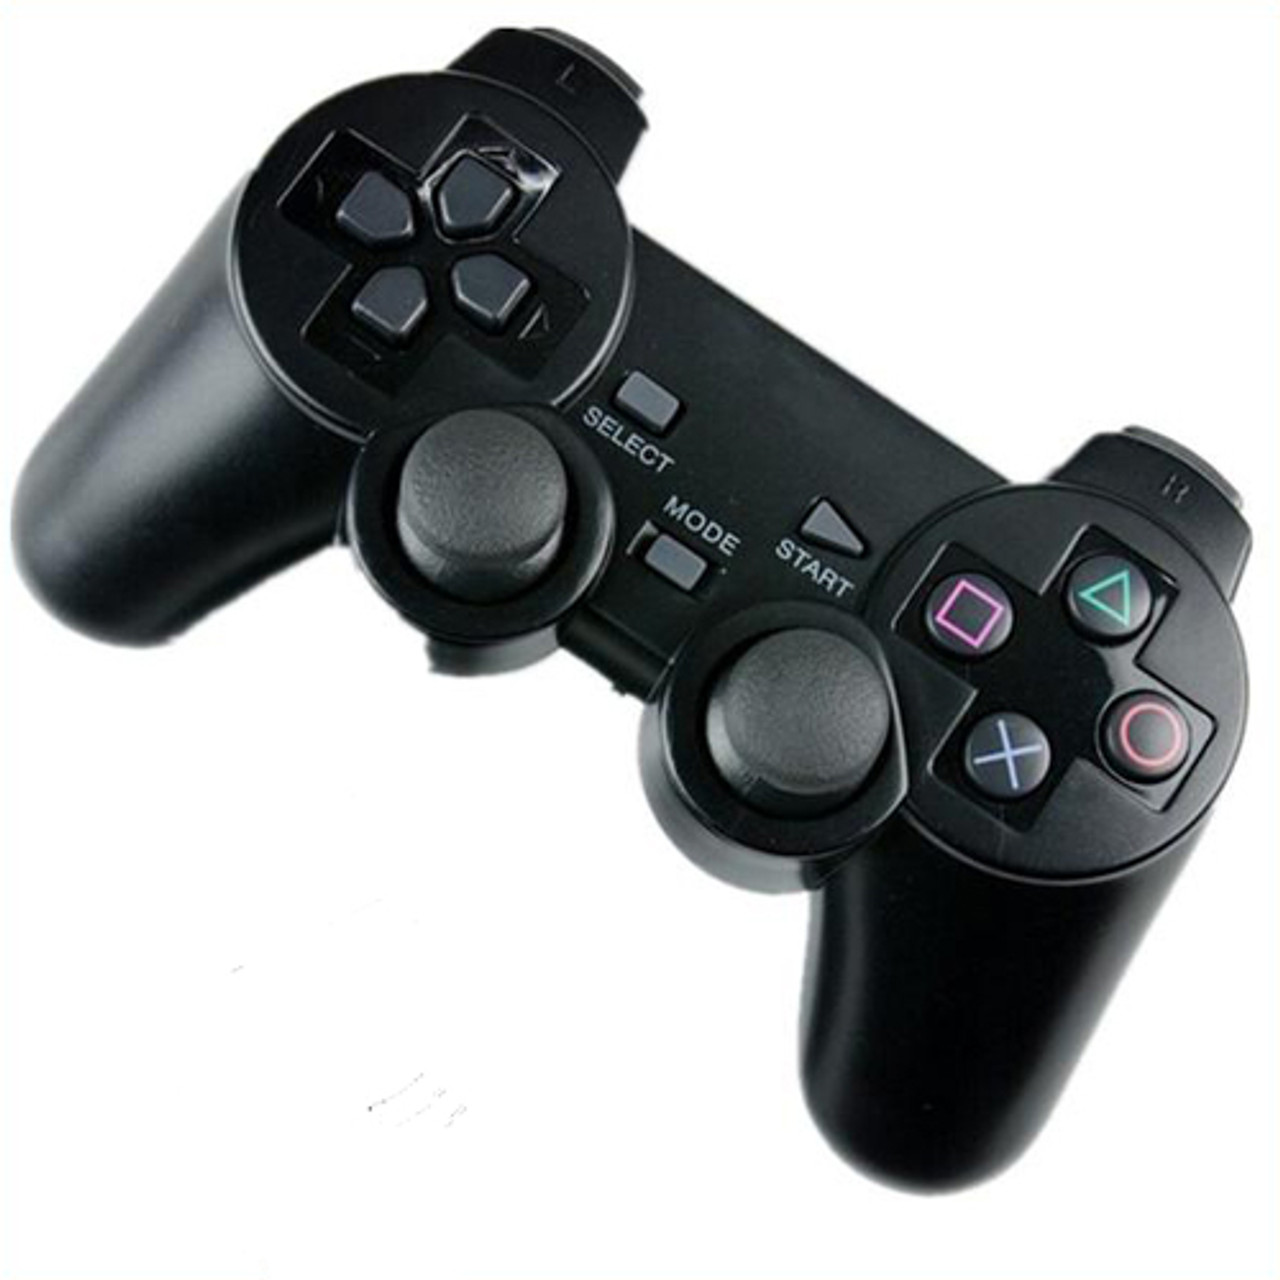 The DualShock 2: An Iconic and Versatile Gaming Controller for a New Era of Gaming插图